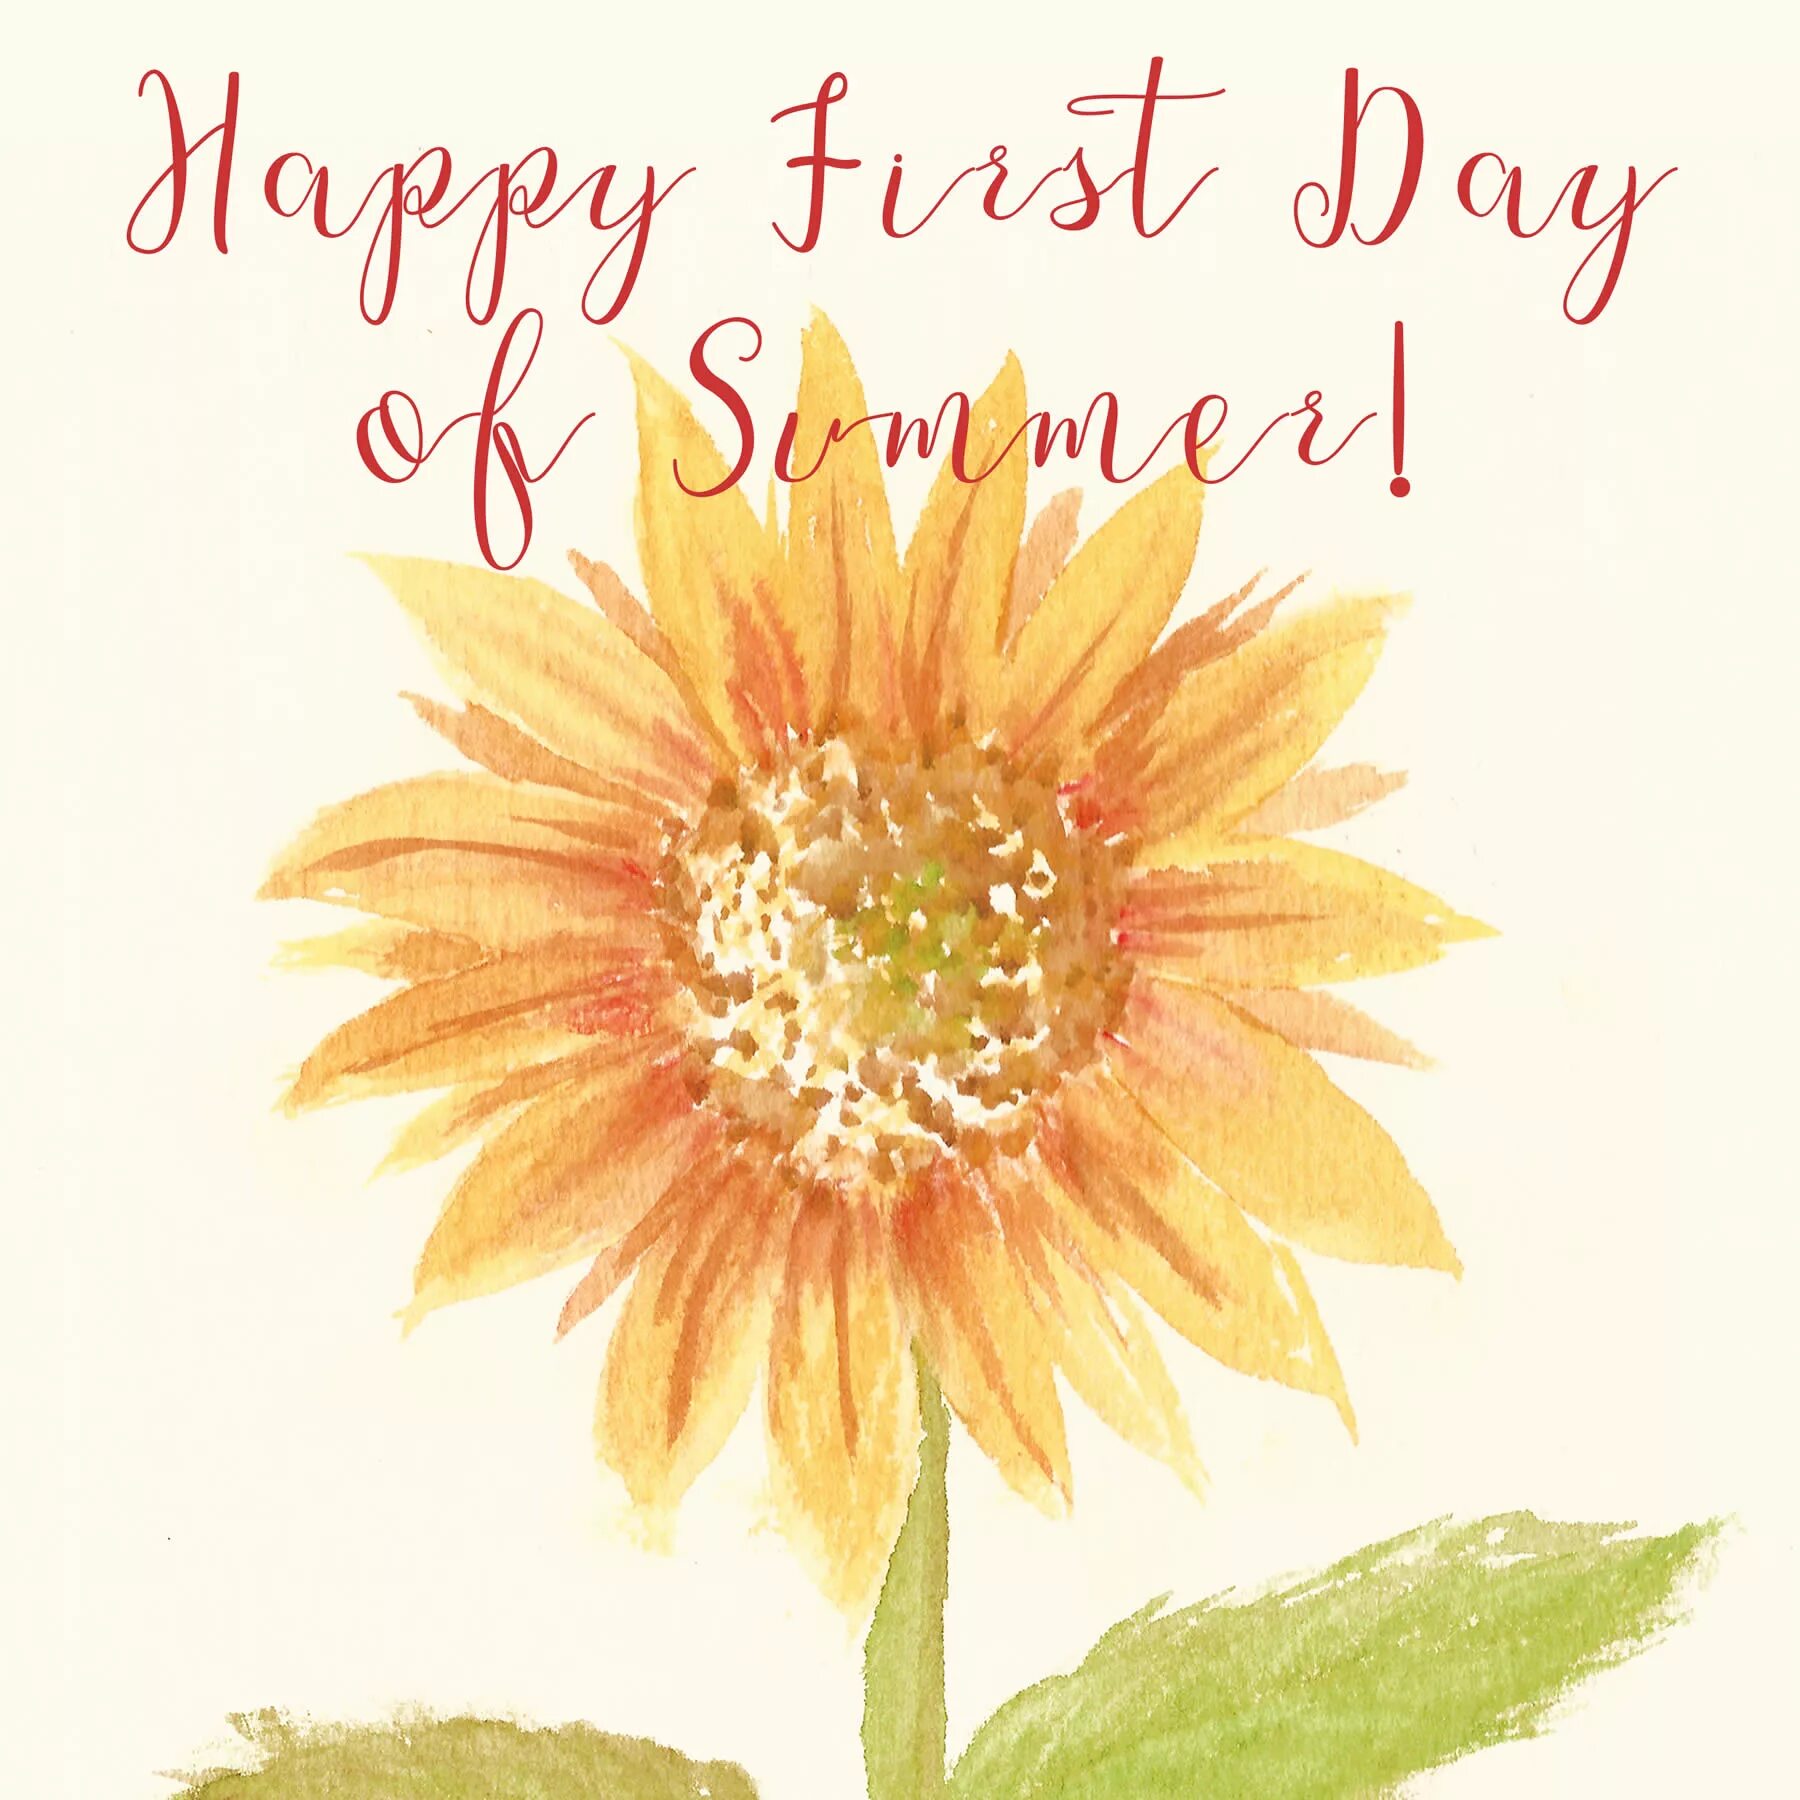 It is happy day of my. Happy Birthday Подсолнухи. Саммер Дэй. 1st Day of Summer. Картинки Happy first Day of Summer.